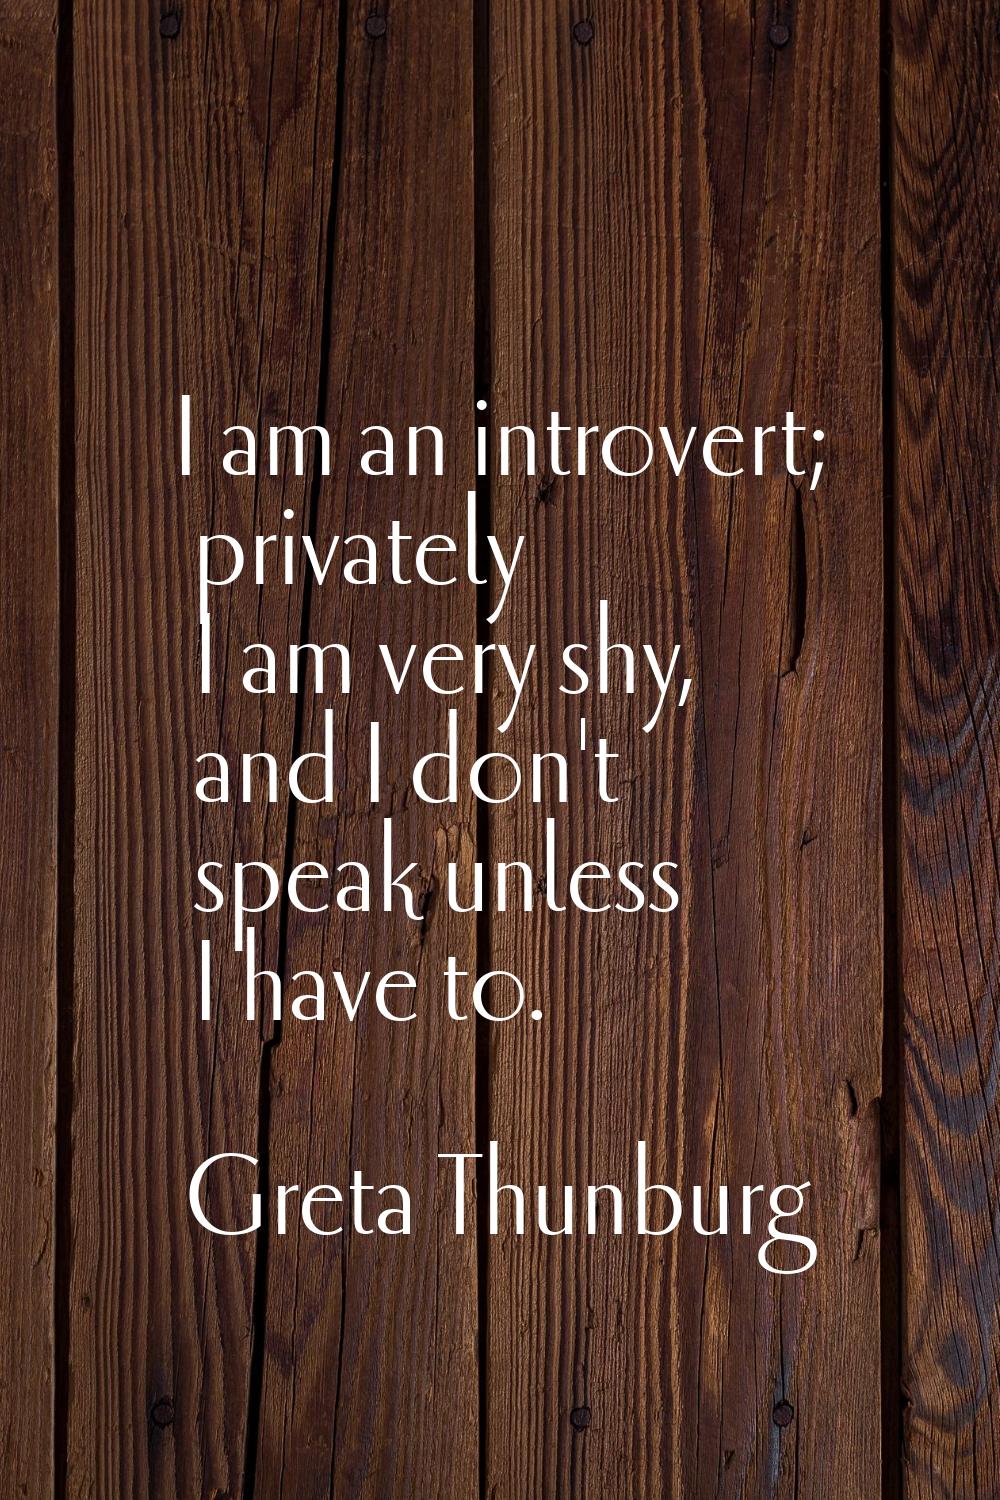 I am an introvert; privately I am very shy, and I don't speak unless I have to.